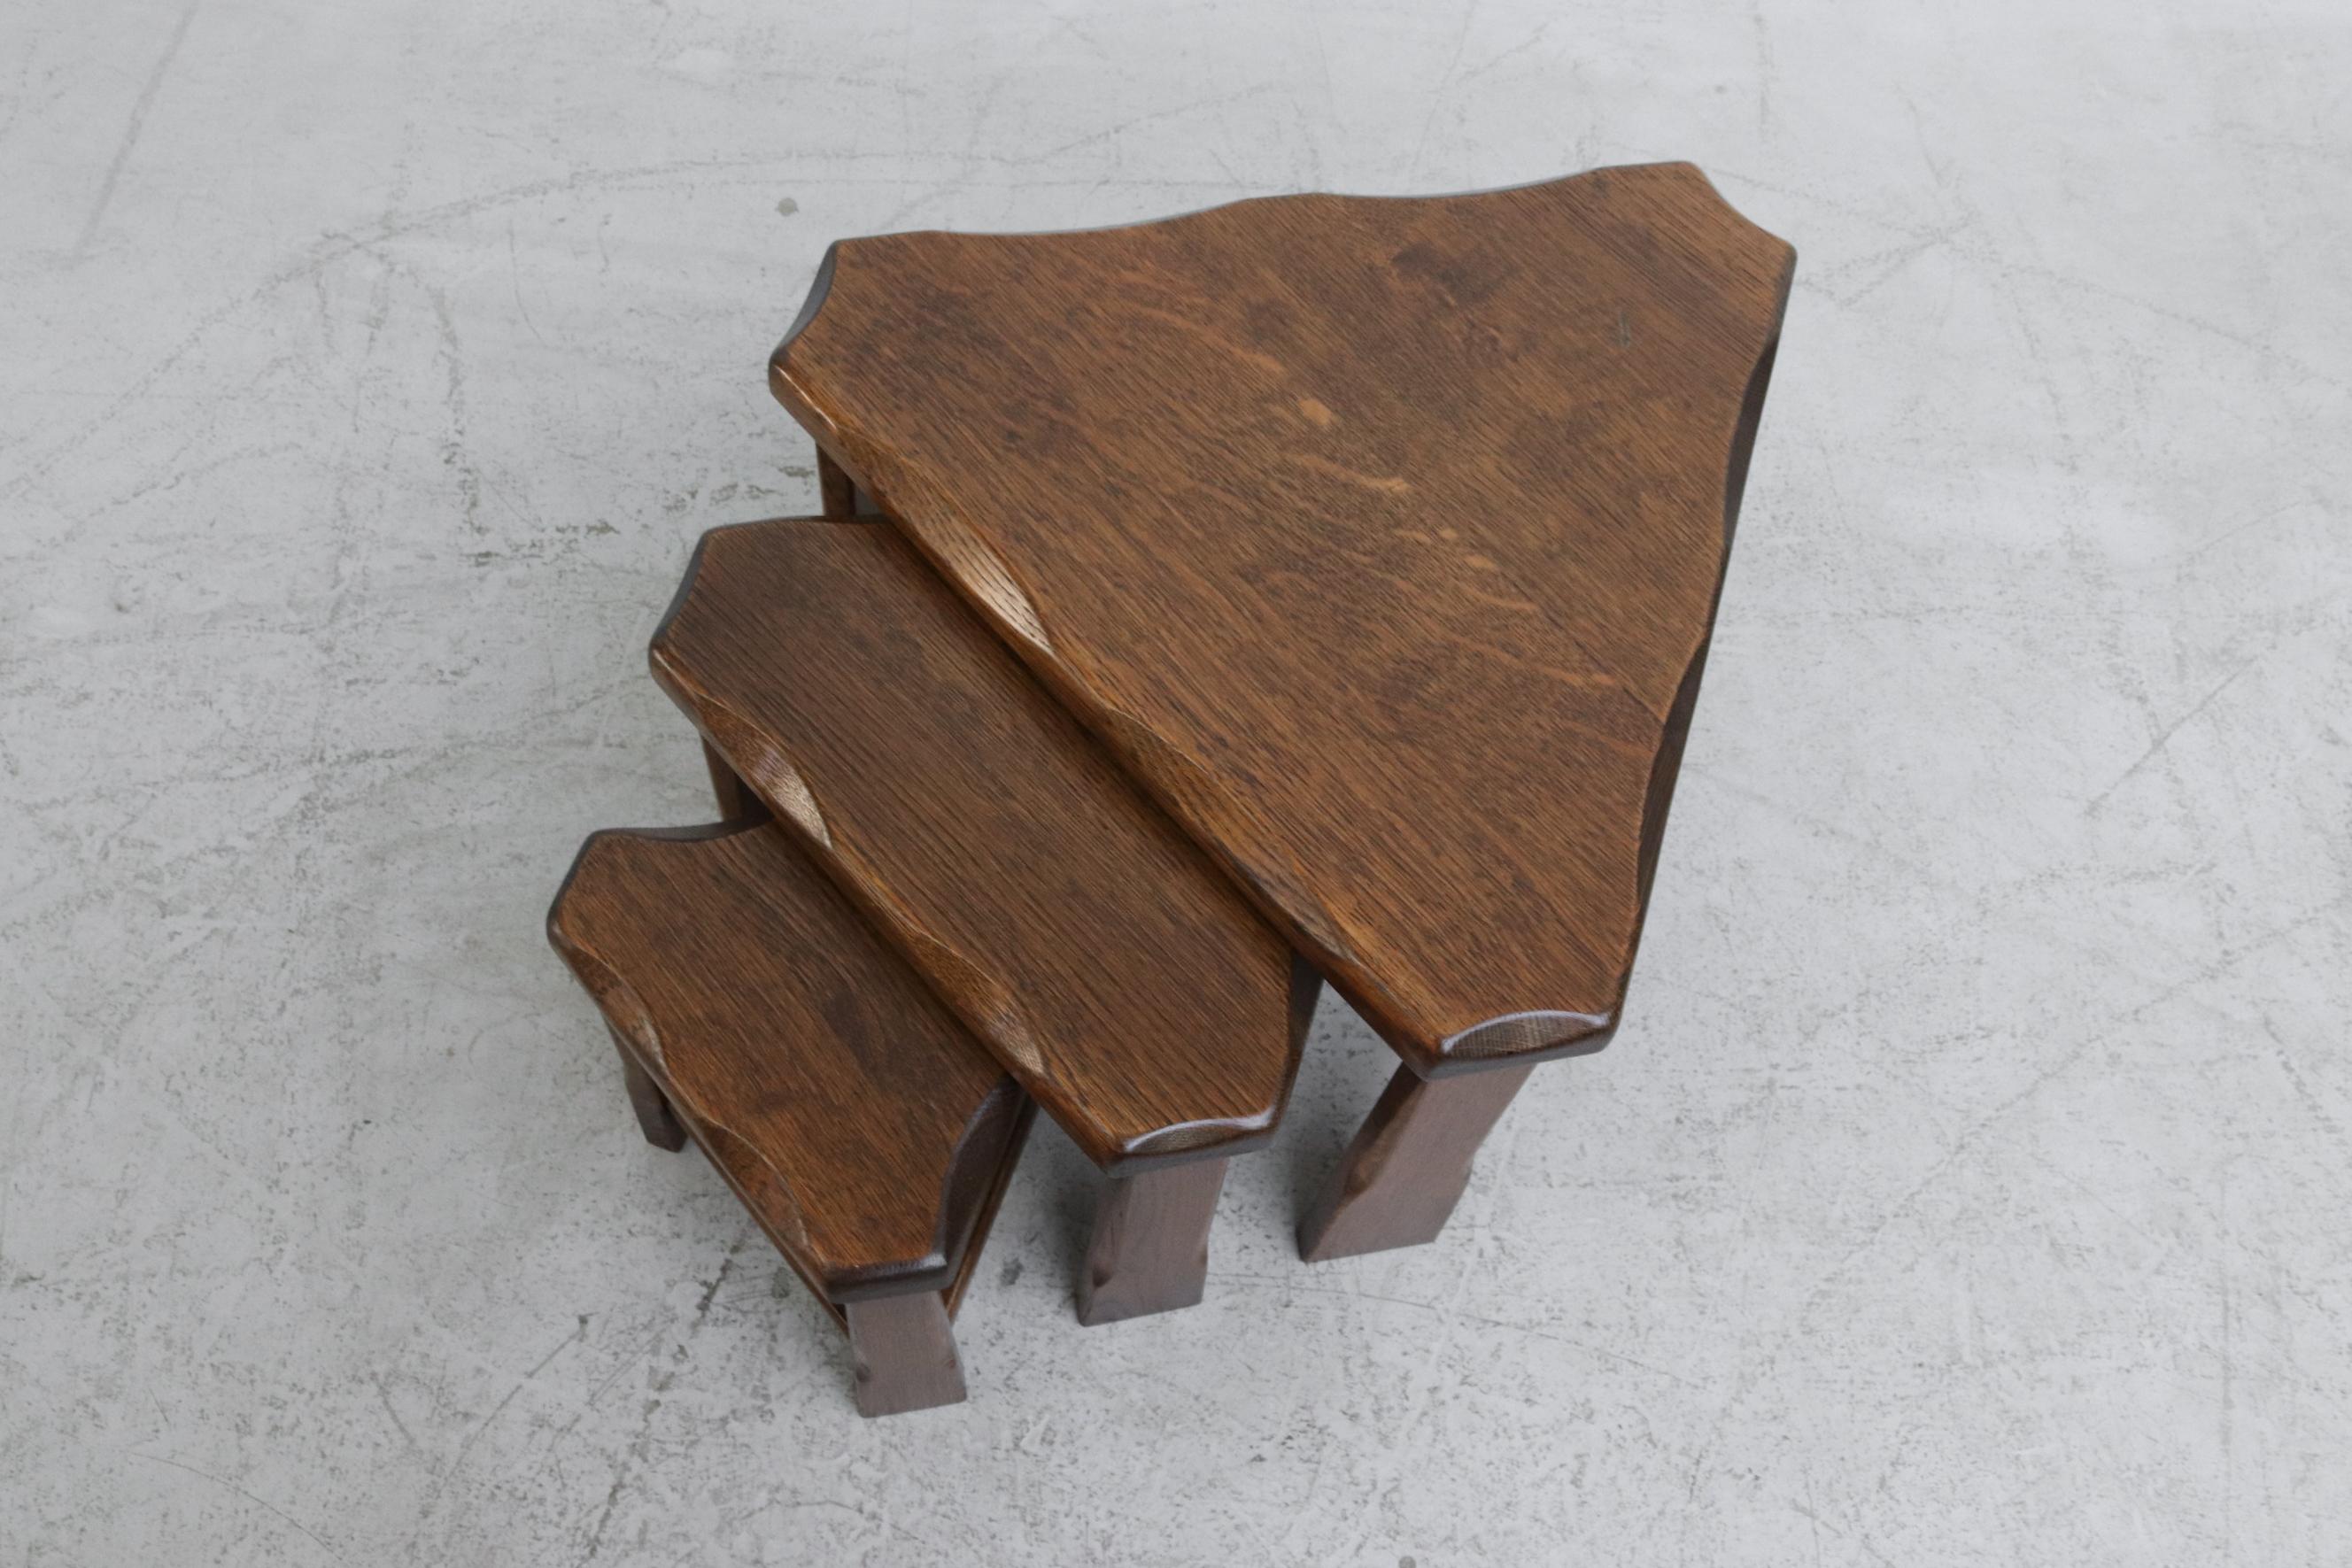 Wood Set of 3 Triangle Brutalist Nesting Tables